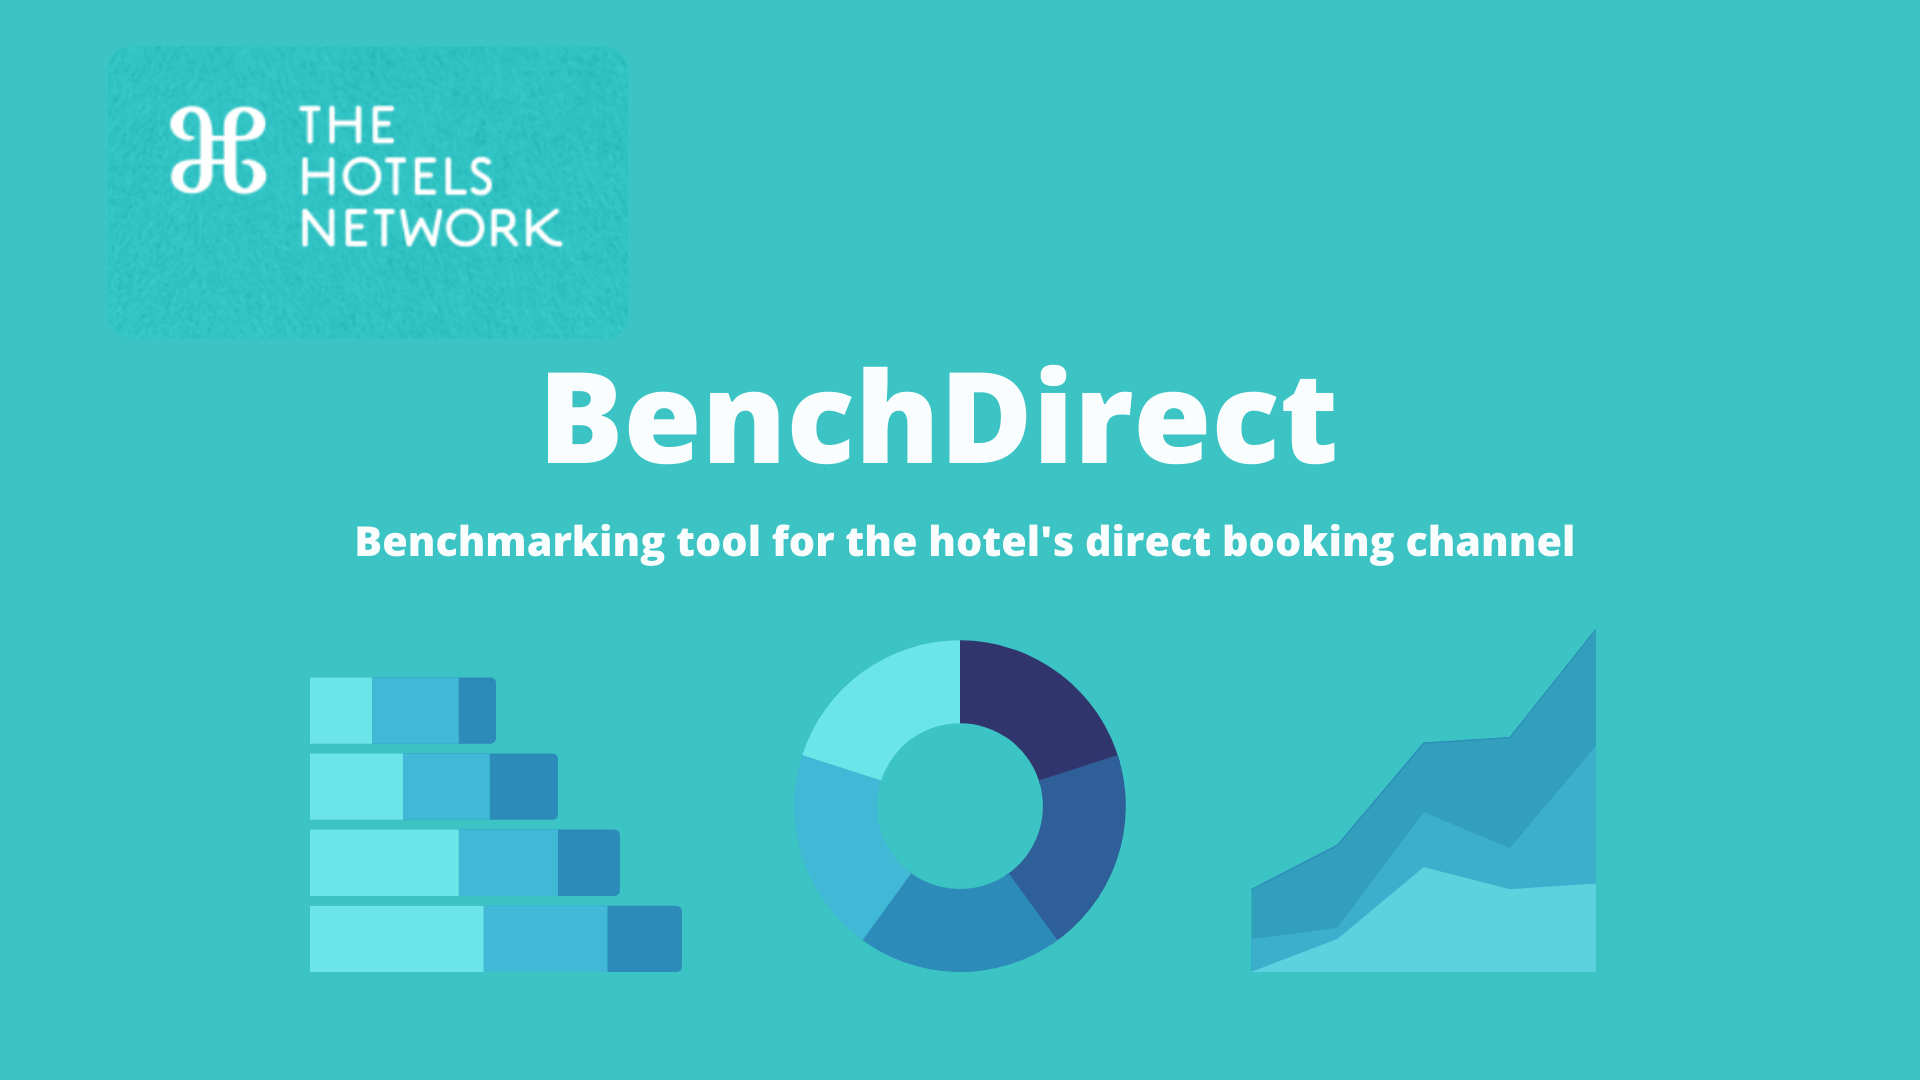 A hotel benchmarking use case: Spotting weaknesses & identifying opportunities to boost direct bookings